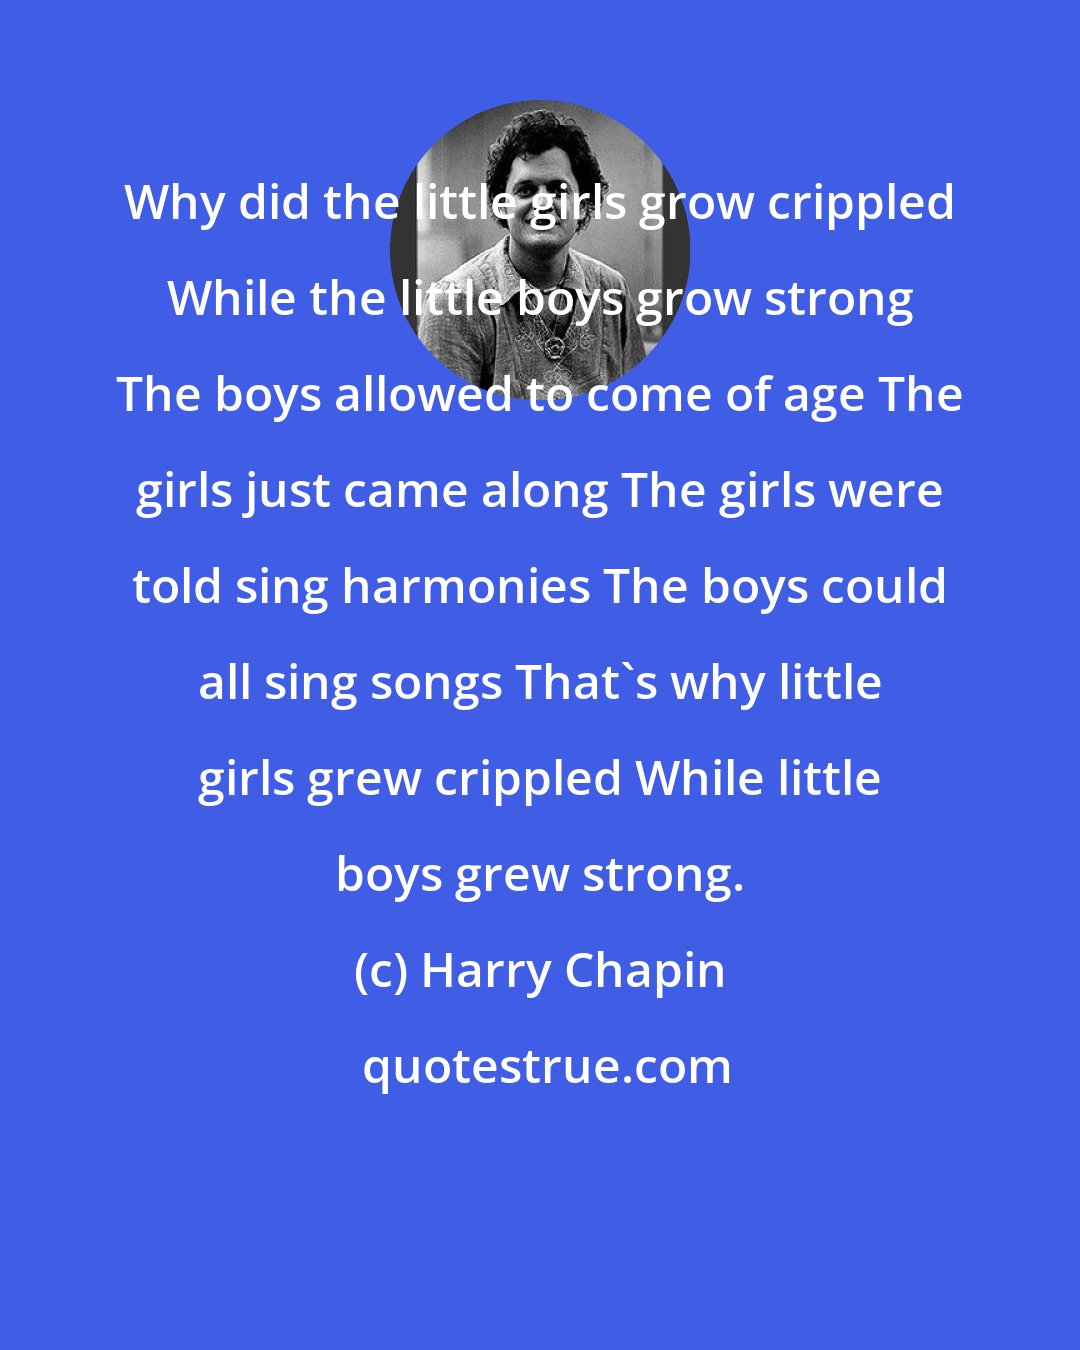 Harry Chapin: Why did the little girls grow crippled While the little boys grow strong The boys allowed to come of age The girls just came along The girls were told sing harmonies The boys could all sing songs That's why little girls grew crippled While little boys grew strong.